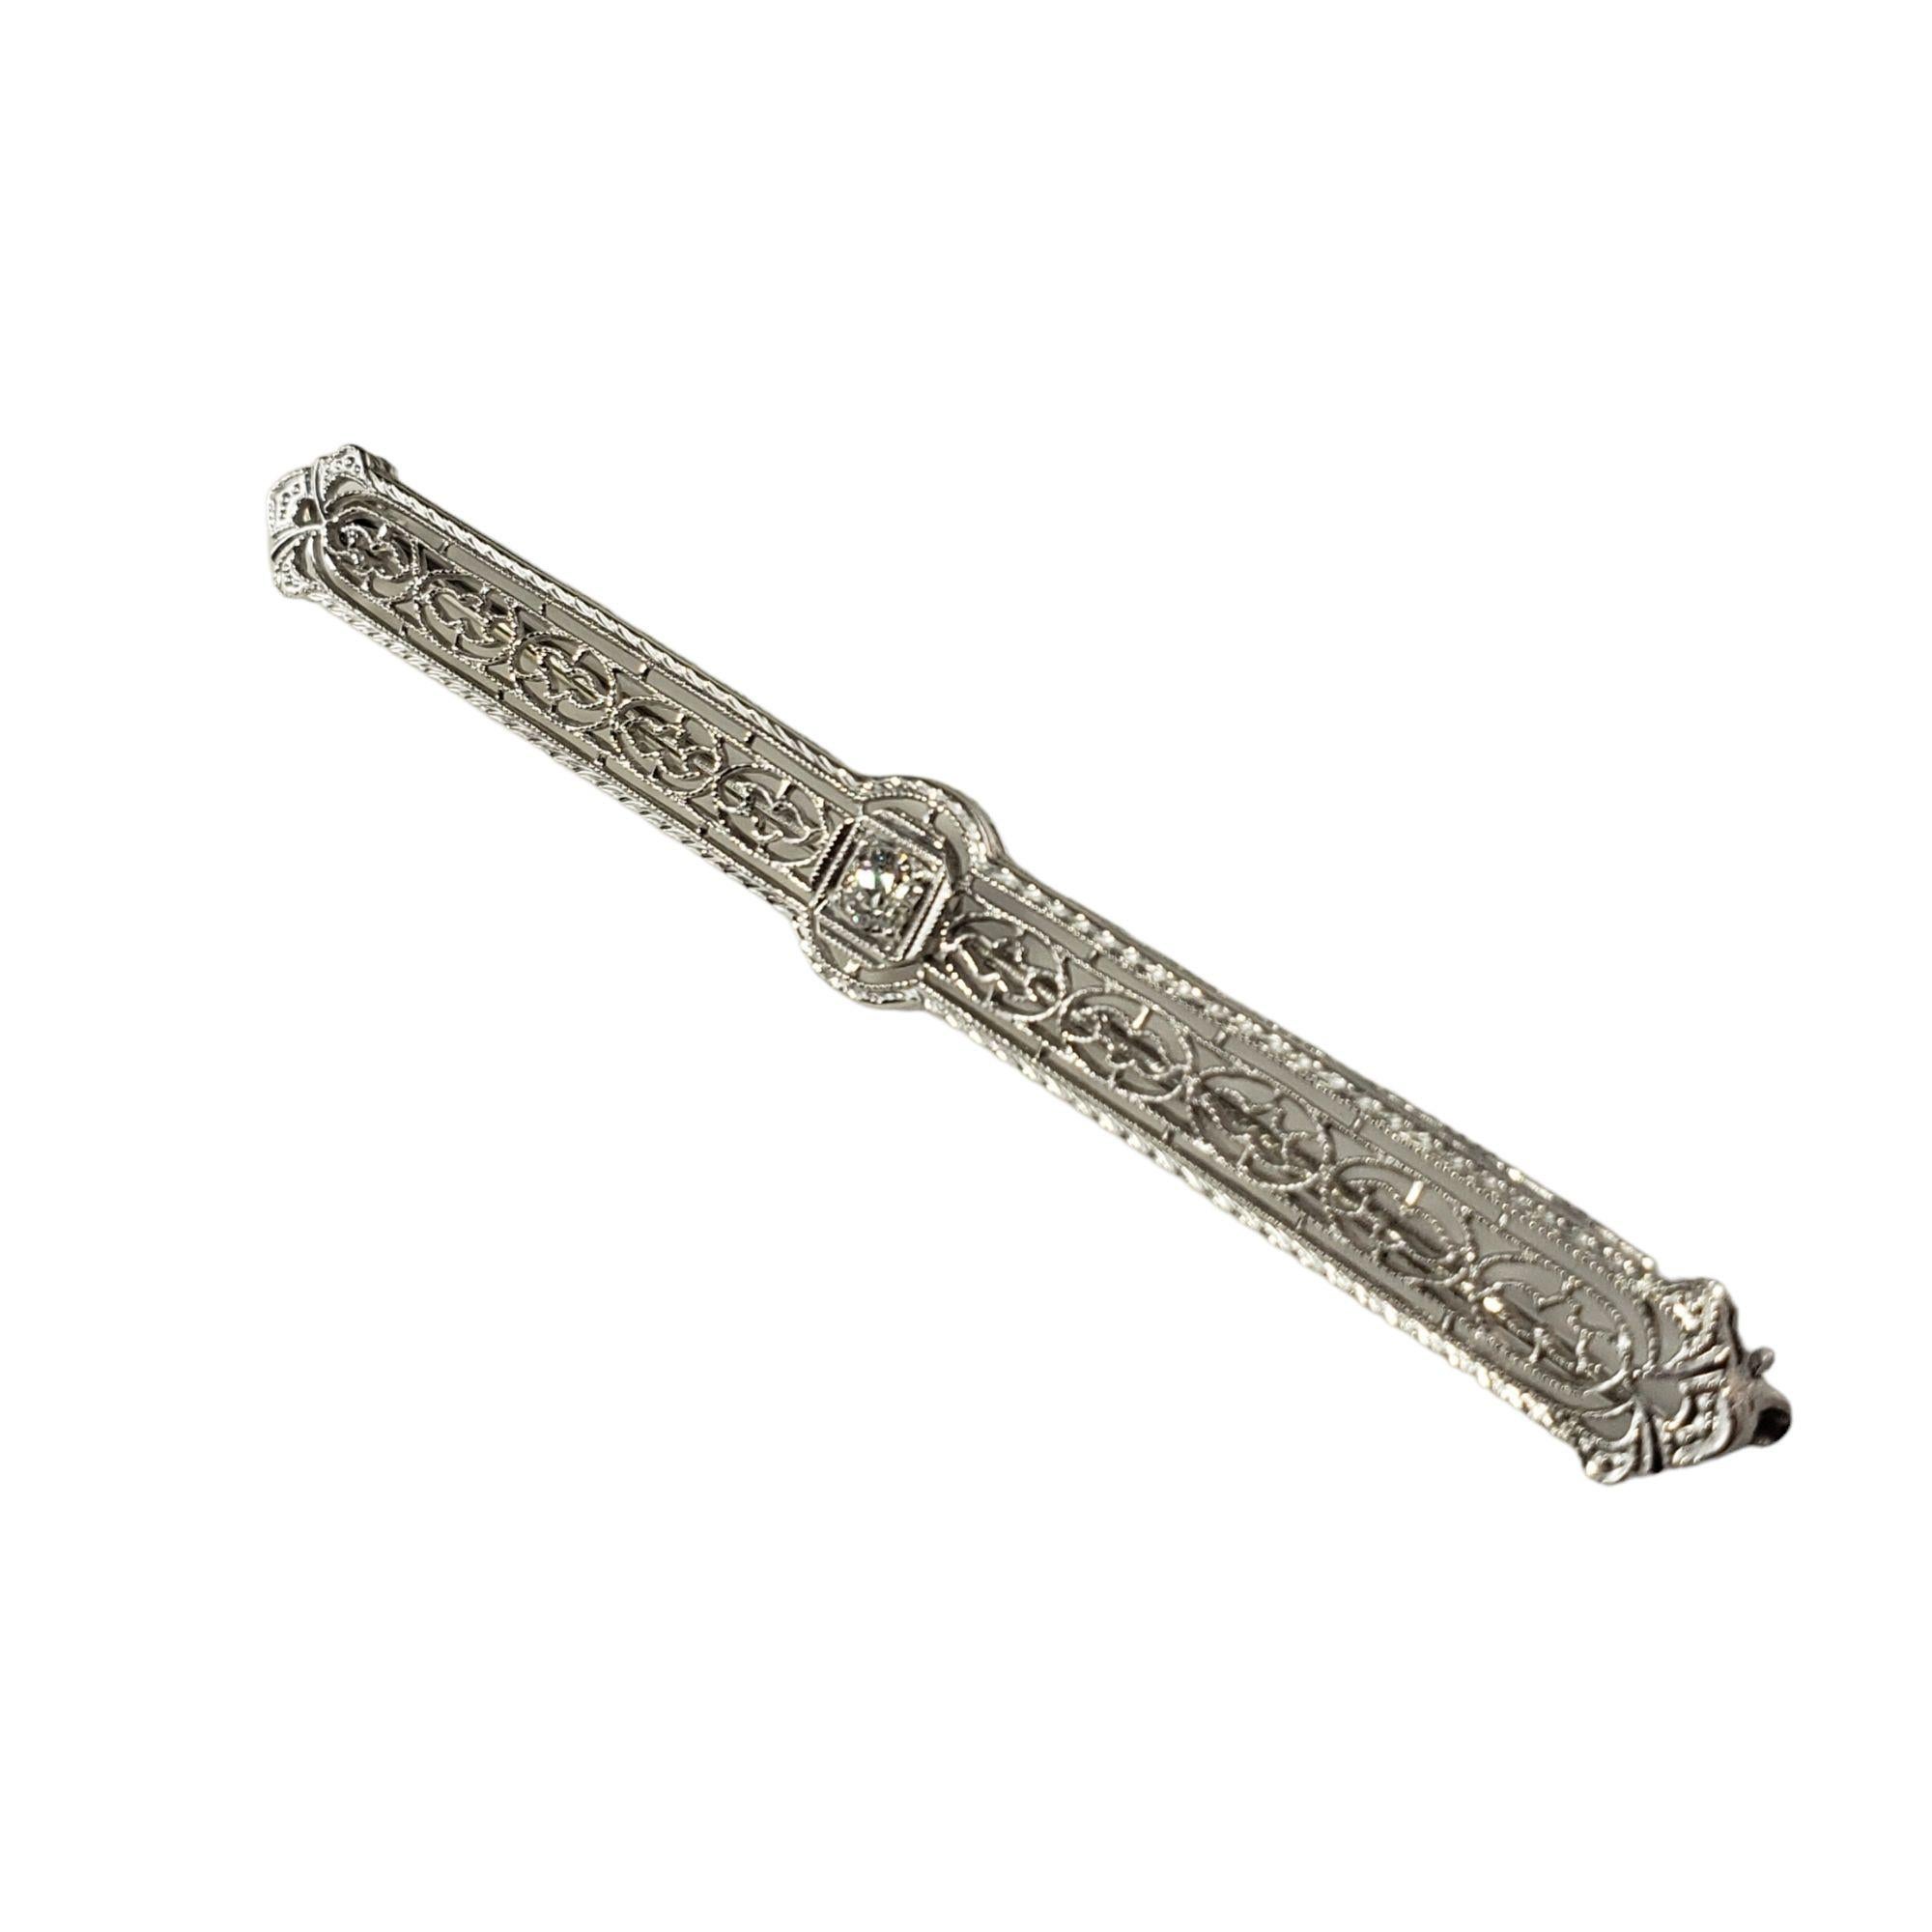 Vintage 14 Karat White Gold Filigree and Diamond Bar Pin #14711 In Good Condition For Sale In Washington Depot, CT